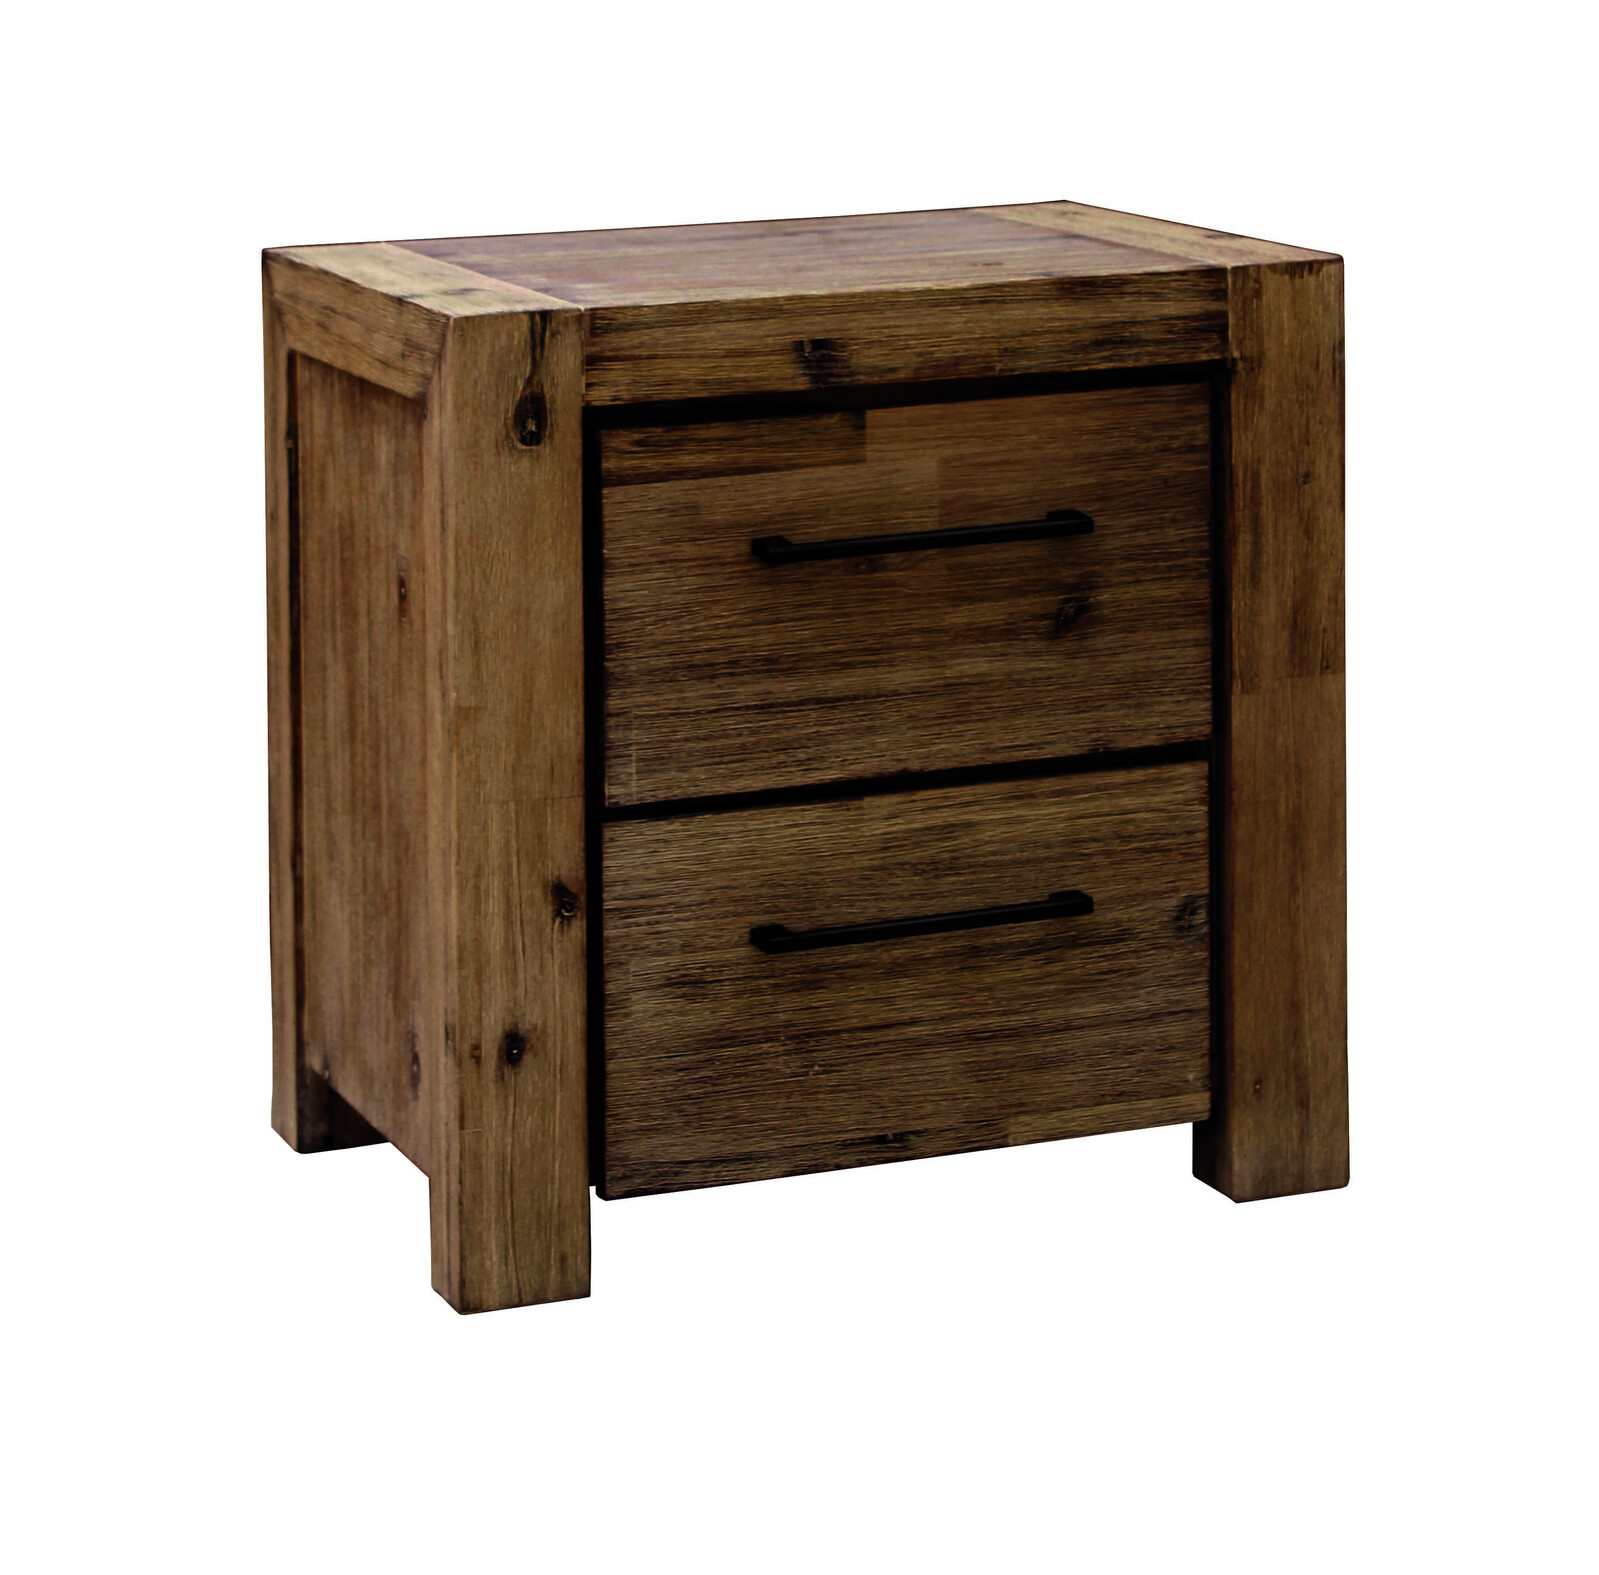 Homefurn Bedside Table 2 Drawer Chest of Drawers Timber 580 x 425 x 600H Annatto 8416 ABT